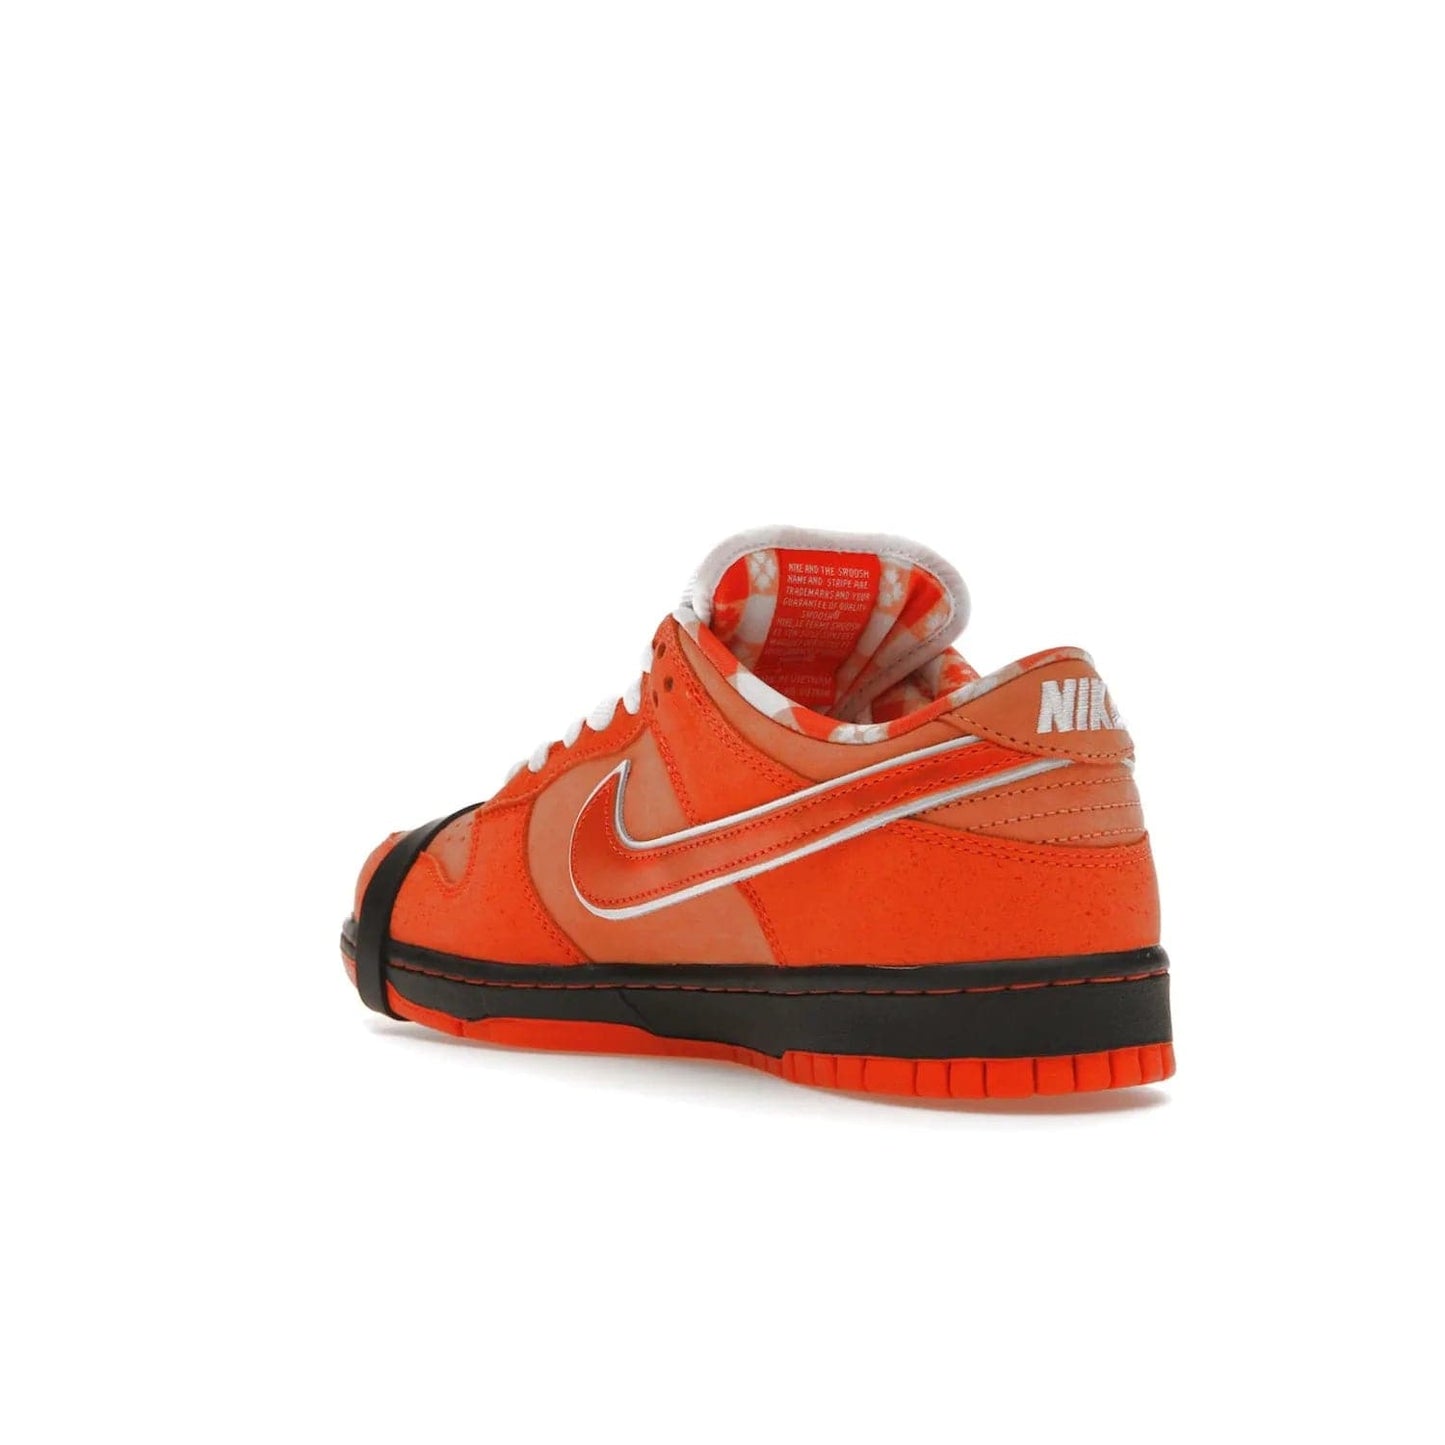 Nike SB Dunk Low Concepts Orange Lobster - Image 24 - Only at www.BallersClubKickz.com - Limited Nike SB Dunk Low Concepts Orange Lobster features premium nubuck upper with vibrant oranges for eye-catching colorblocked design. Signature Nike SB tag and bib-inspired interior for added texture. Outsole and cupsole provide extra reinforcement. Get it 12/20/2022.